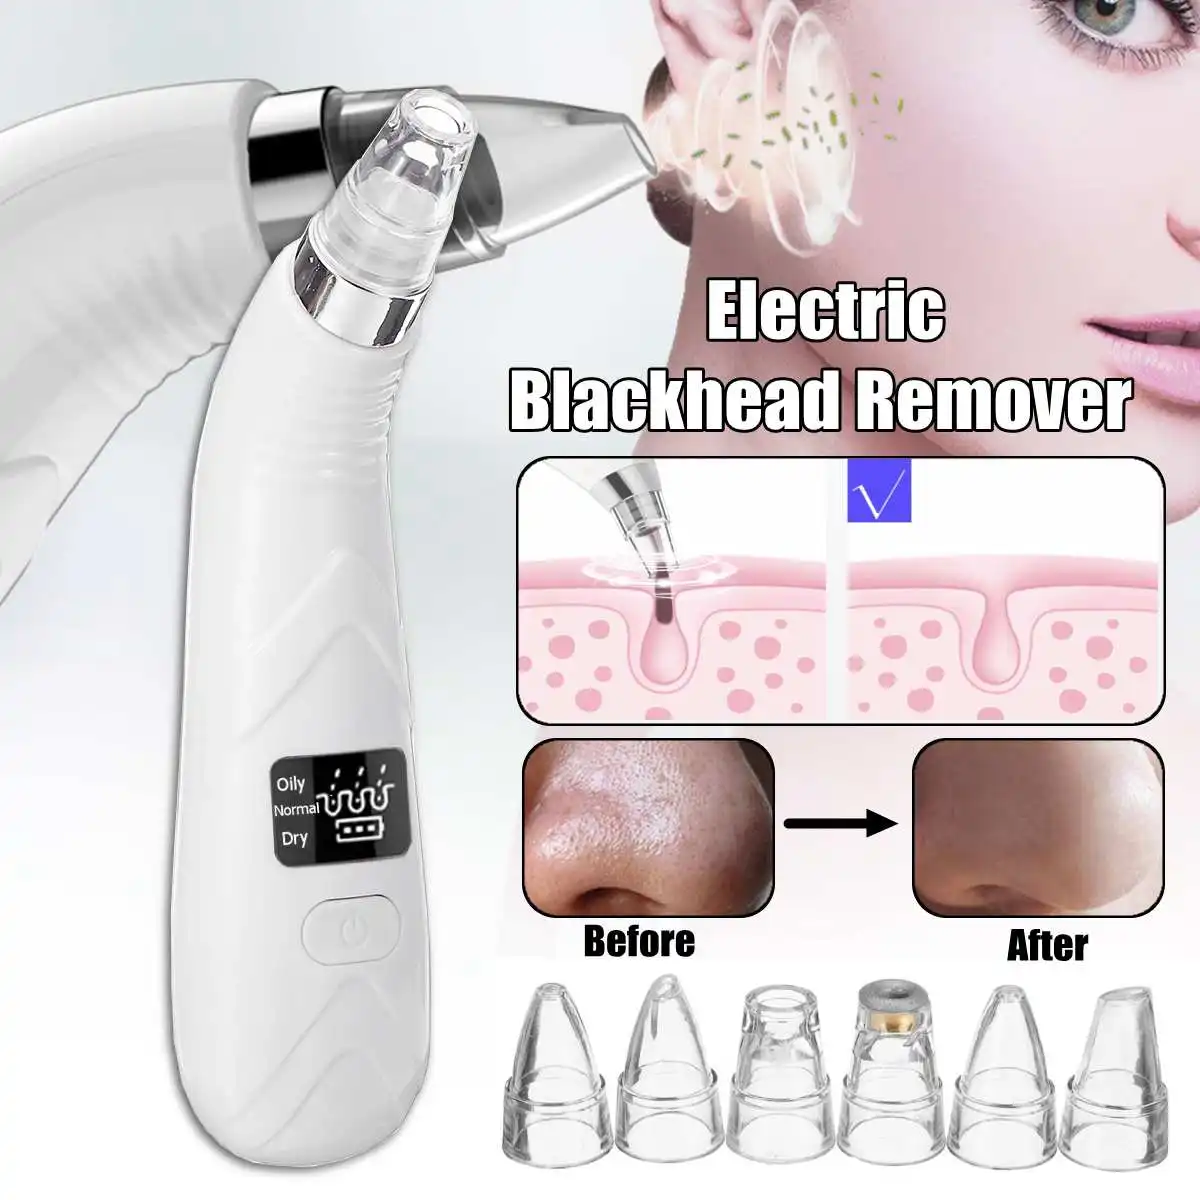 

3 Gears USB Electric Face Cleanser Vacuum Pore Cleaner Facial Skin Care Blackhead Remover +6 Cosmetology Heads